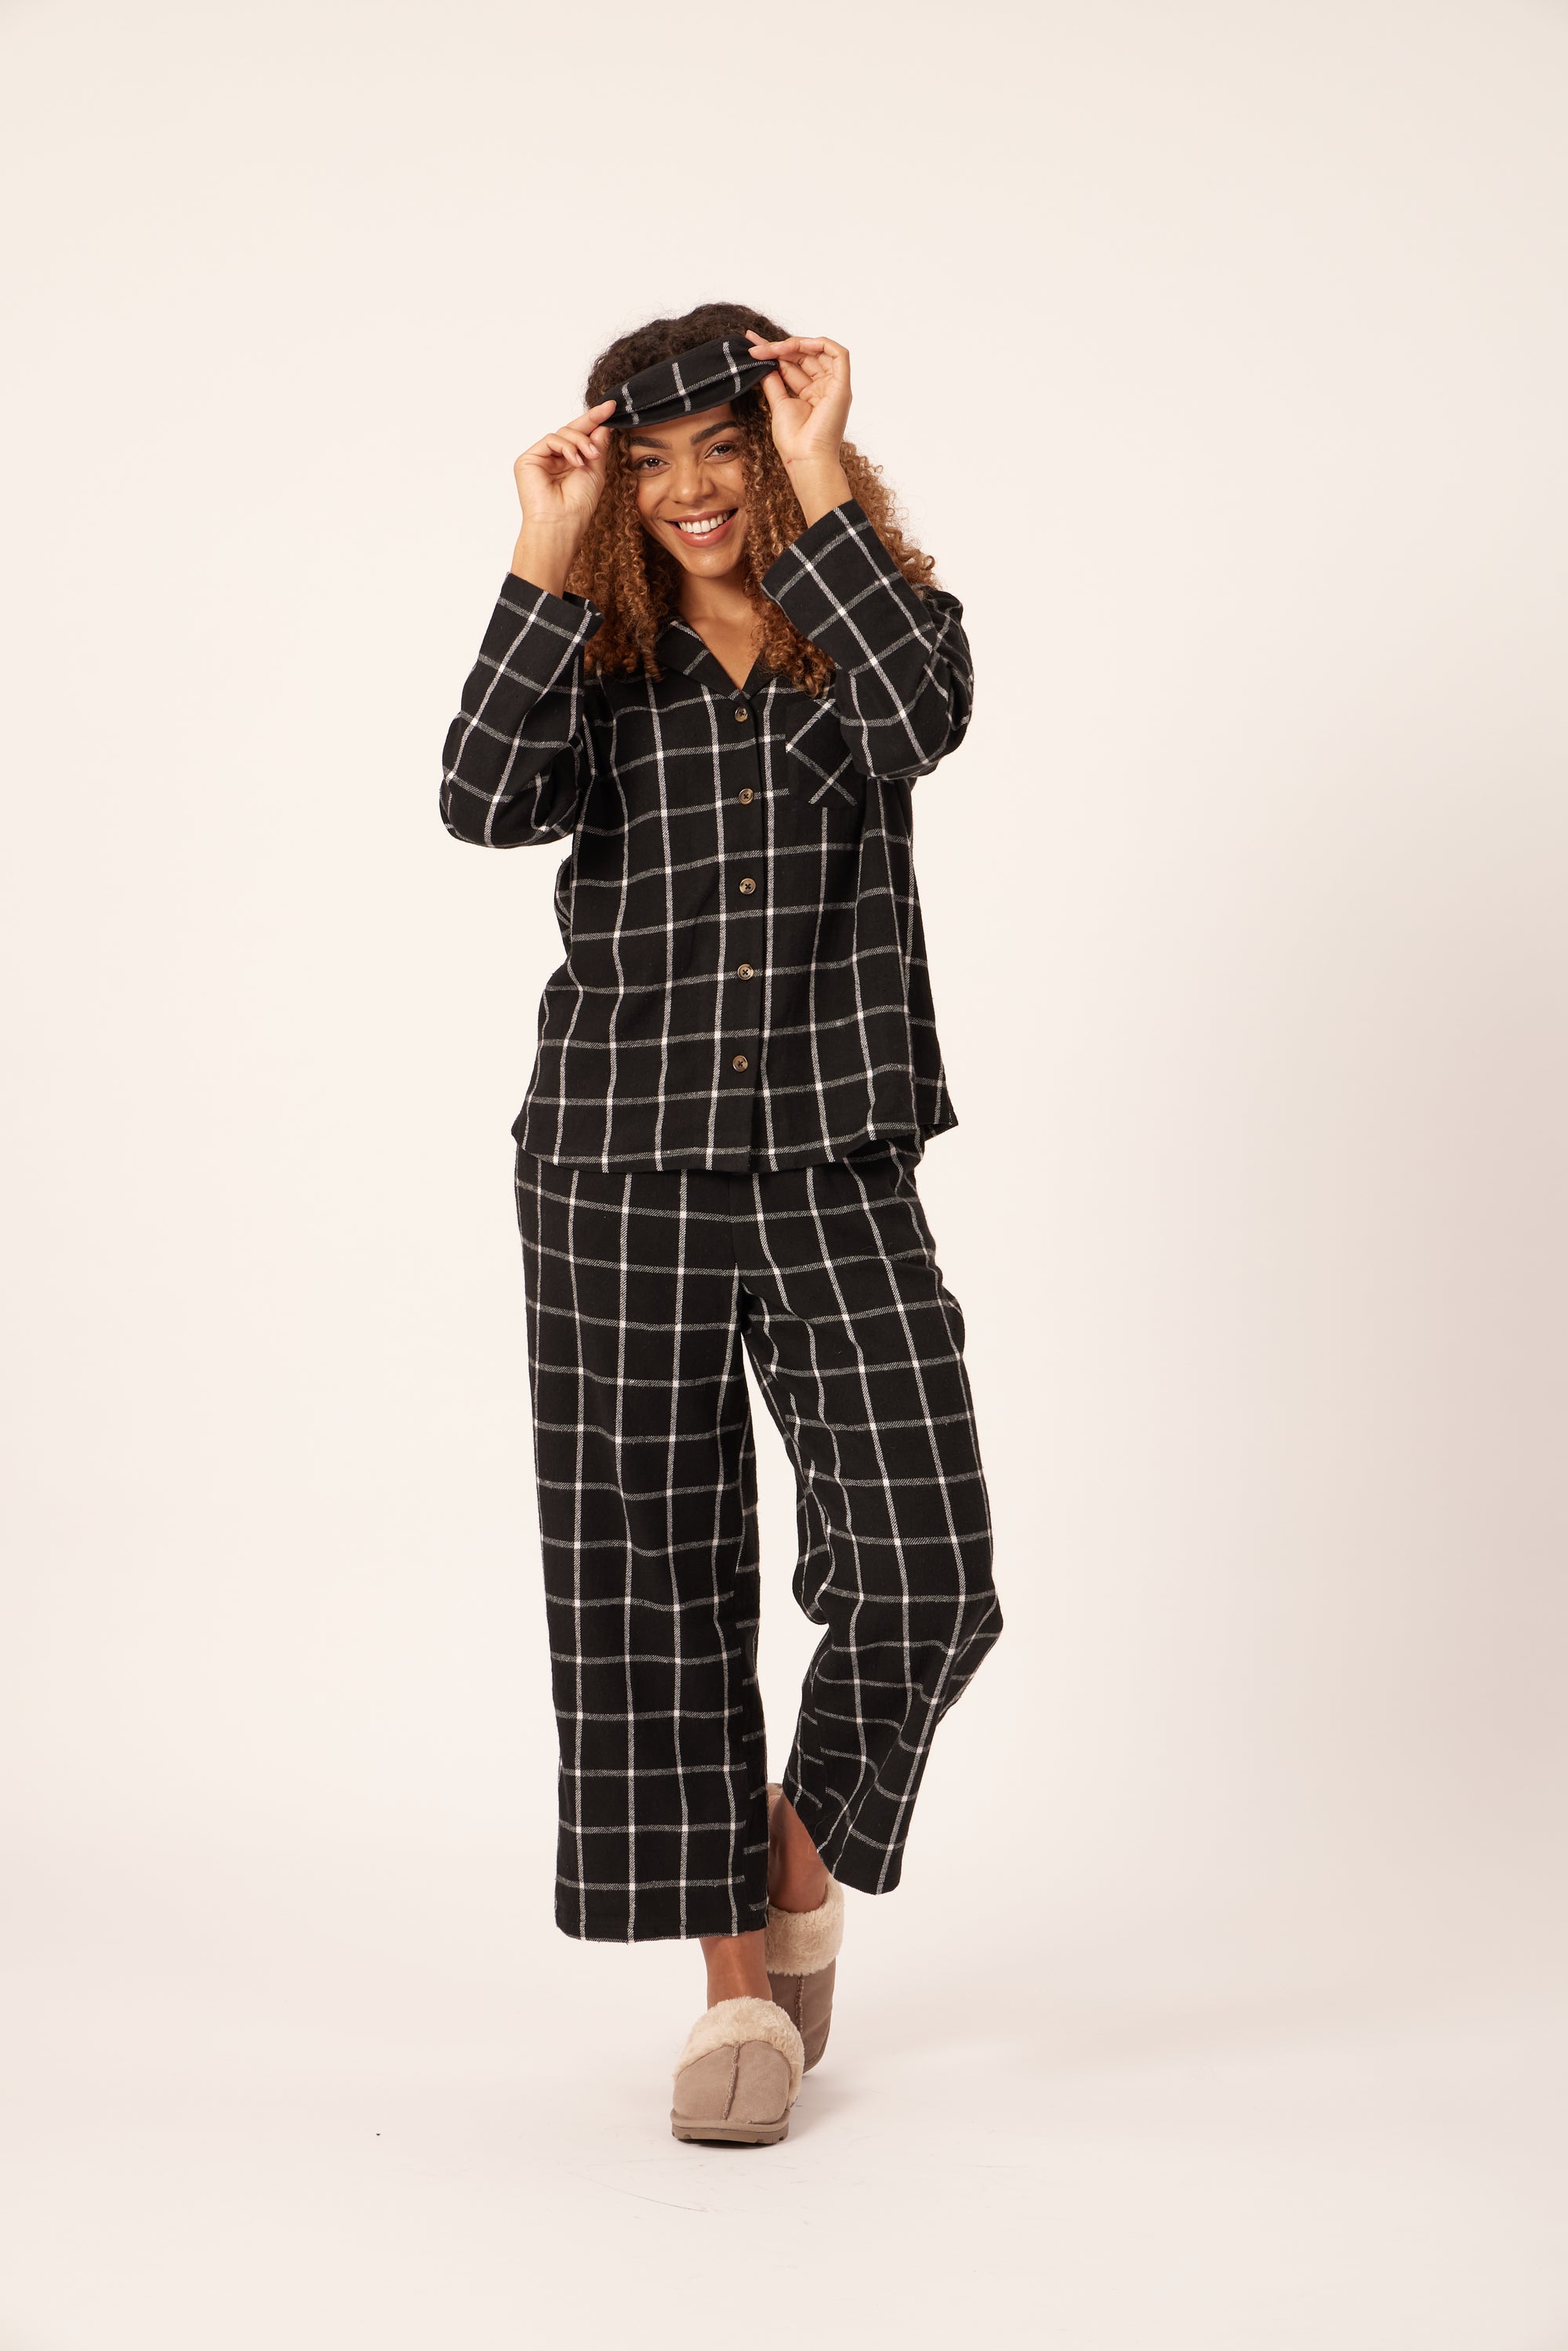 Ellie - Woven – This Set Pyjama Check is Unfolded